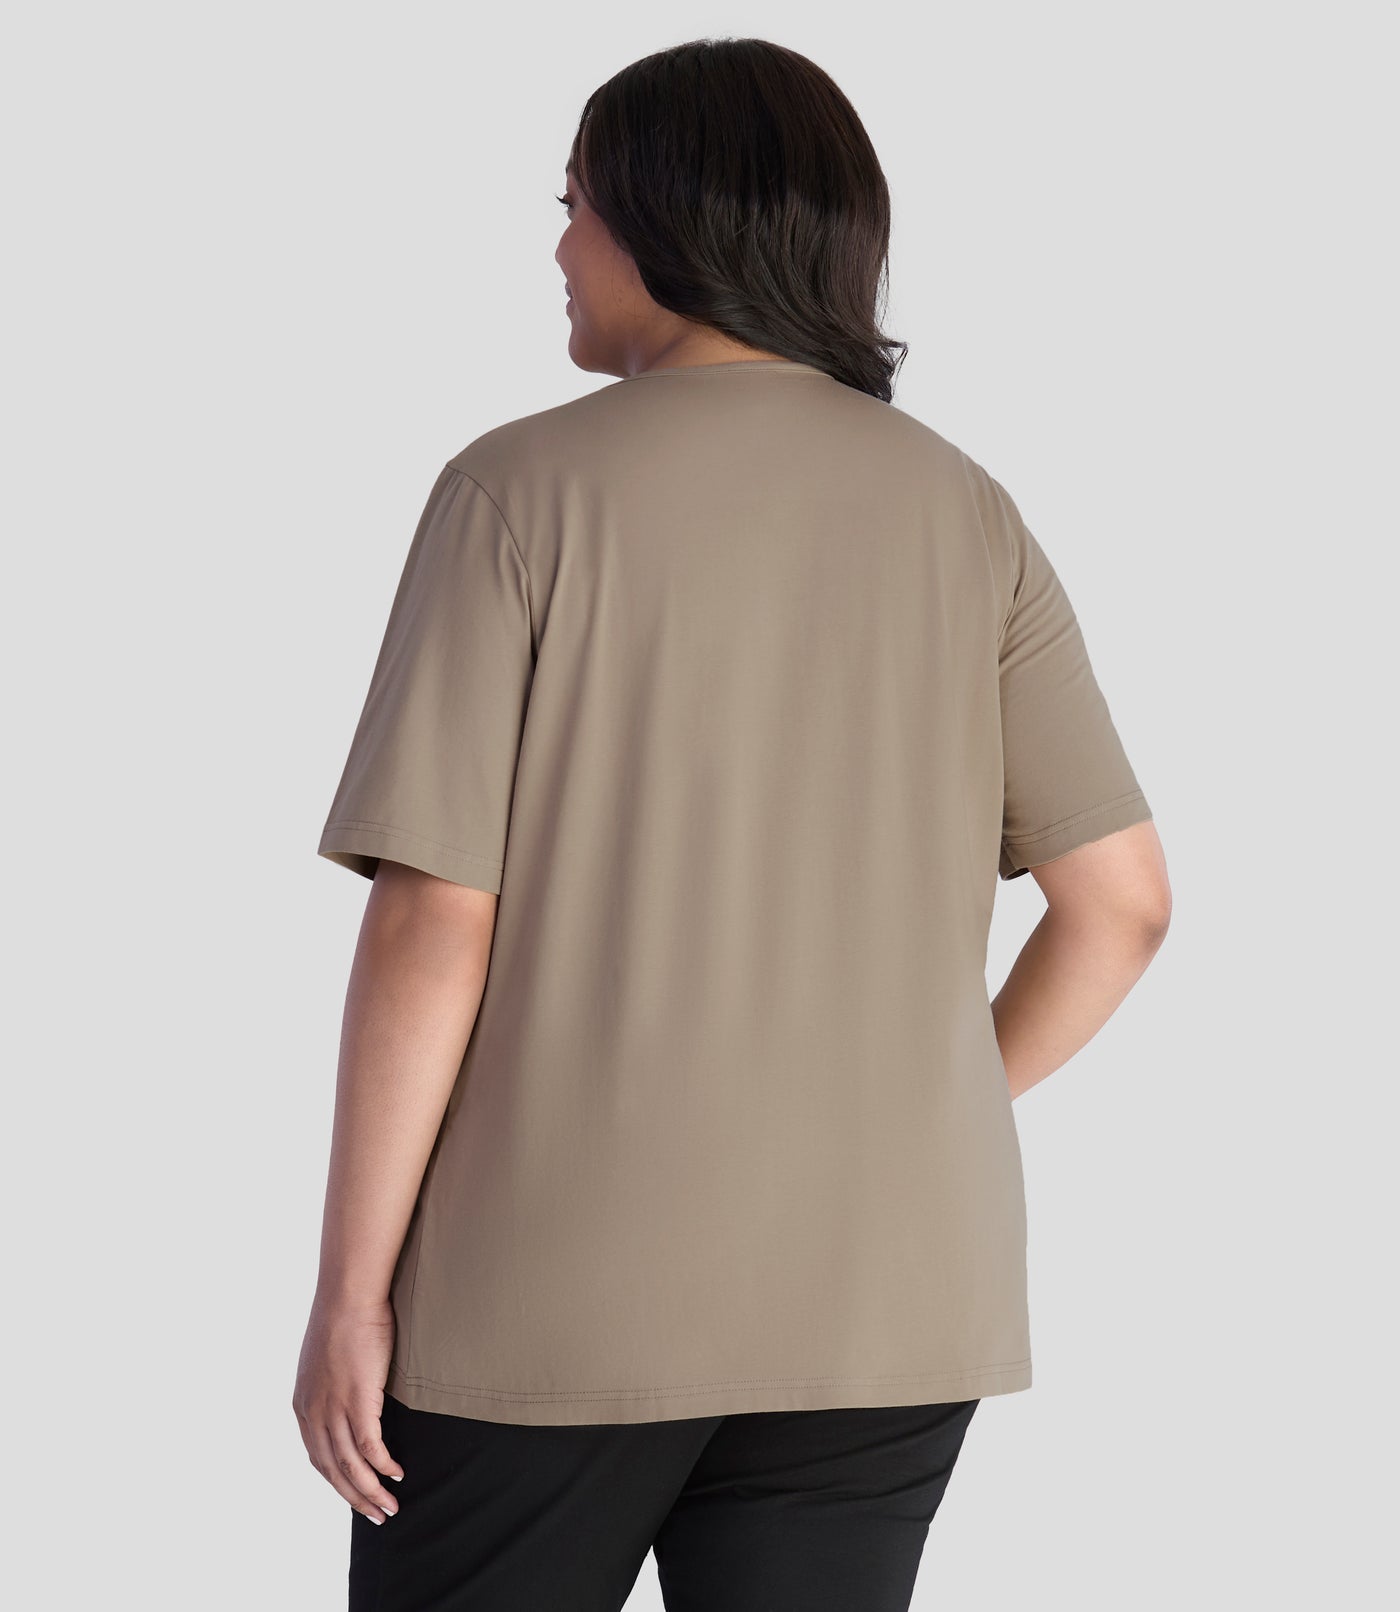 JunoActive model, wearing Stretch Naturals Lite Pintuck Top in color Beachwood. Model is facing back and hands down by her side.